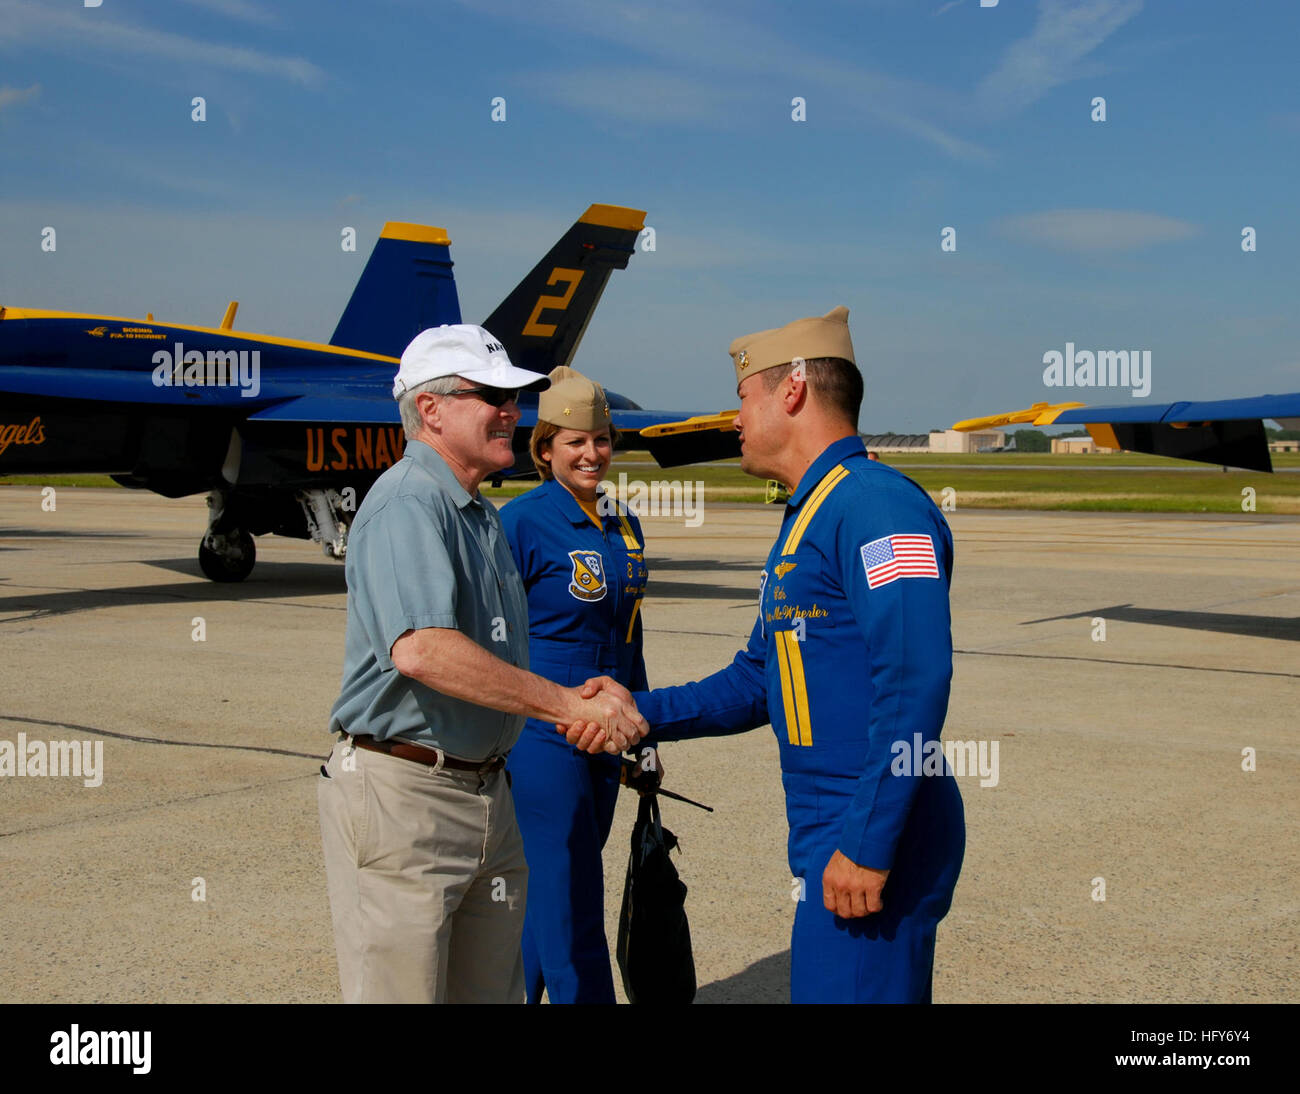 100516-N-8732C-274 JOINT BASE ANDREWS, Md. (May 16, 2010) Secretary of the Navy (SECNAV) Ray Mabus, left, congratulates Cmdr. Greg McWherter, commanding officer of the U.S. Navy flight demonstration team, the Blue Angels, for a job well done, following the teamÕs six performances during the 2010 Joint Service Open House Air Show at Joint Base Andrews, Md. (U.S. Navy photo by Joseph P Cirone/Released) US Navy 100516-N-8732C-274 Secretary of the Navy Ray Mabus congratulates Cmdr. Greg McWherter for a job well done, following the Blue Angels' six performances during the 2010 Joint Service Open Ho Stock Photo